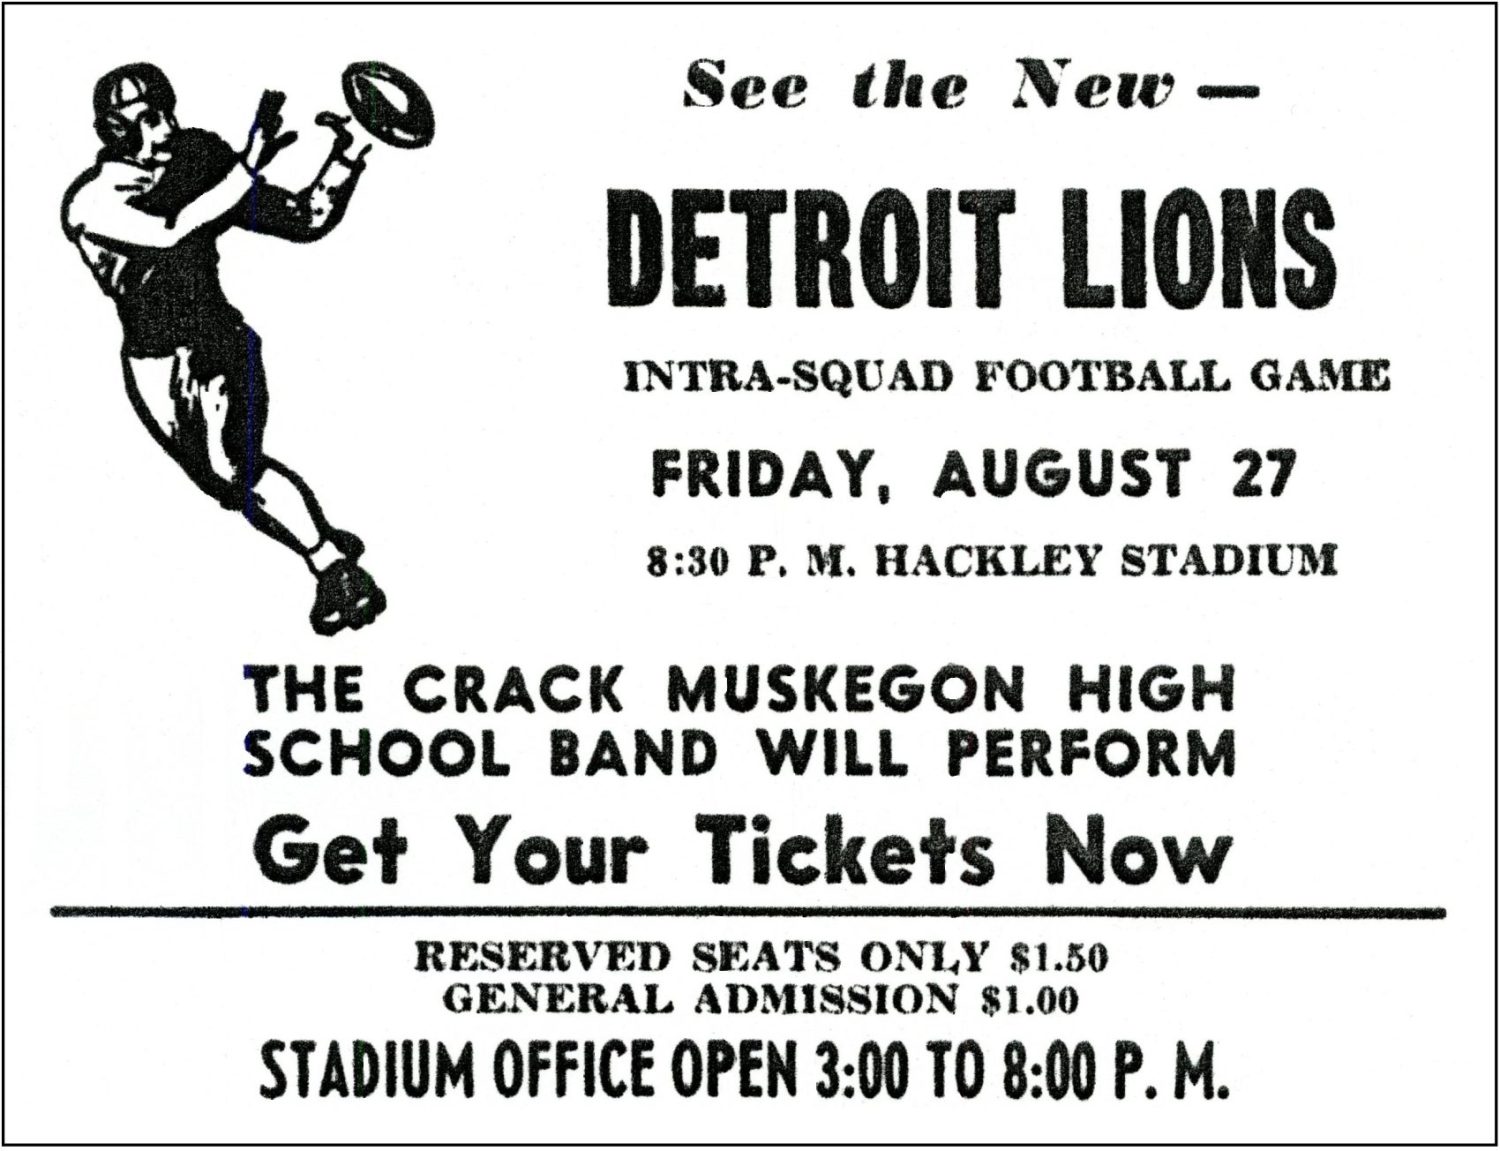 The day the Detroit Lions came to town